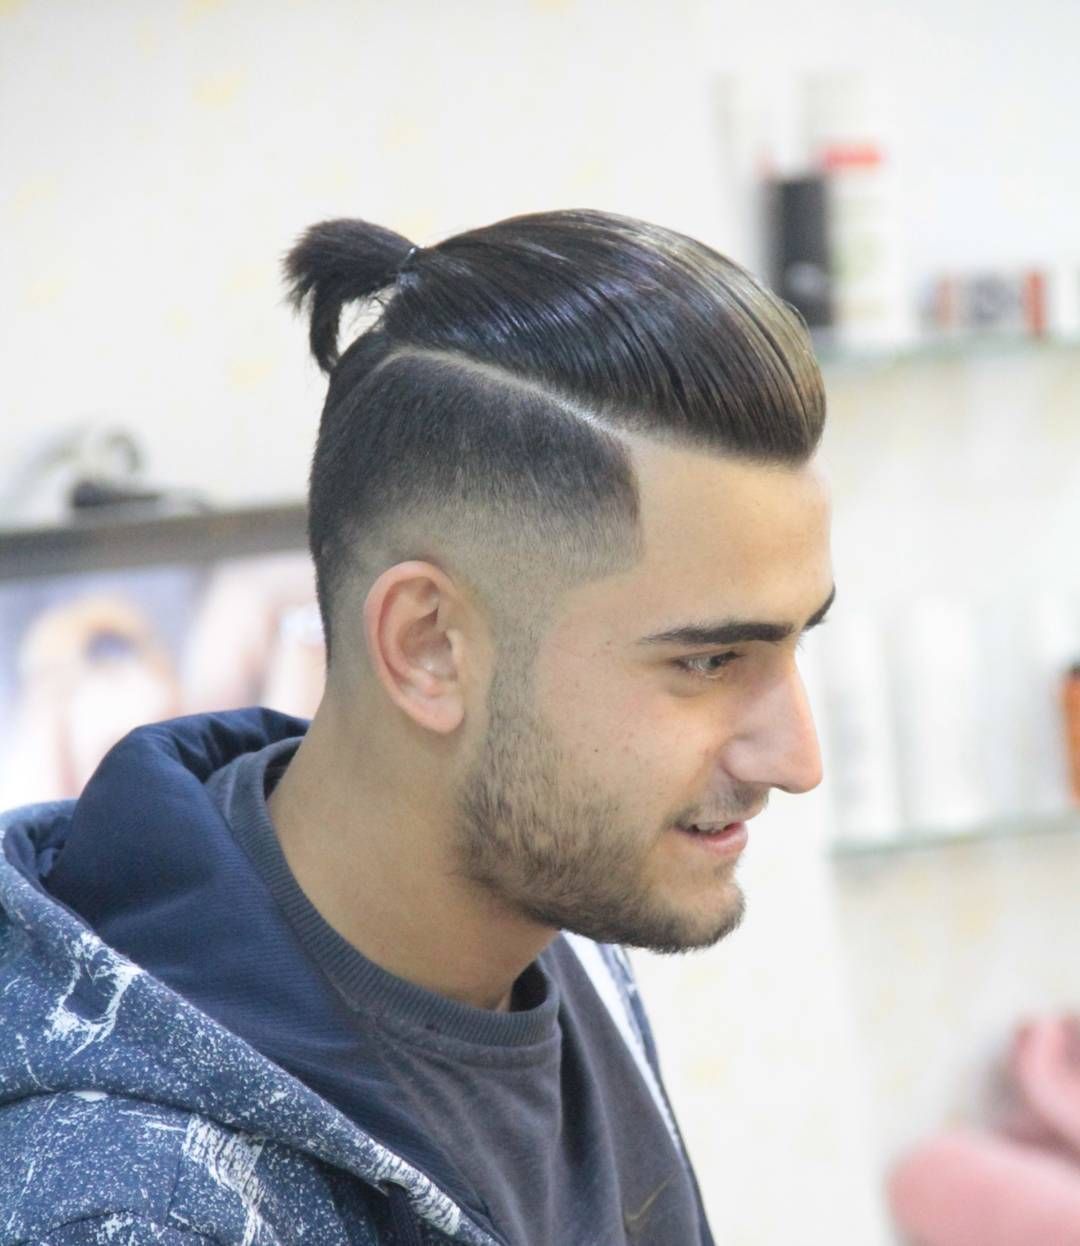 ponytail hairstyle for men 36 Black male ponytail hairstyles | Male ponytail with Bangs | Mens ponytail with fade Ponytail Hairstyles for Men